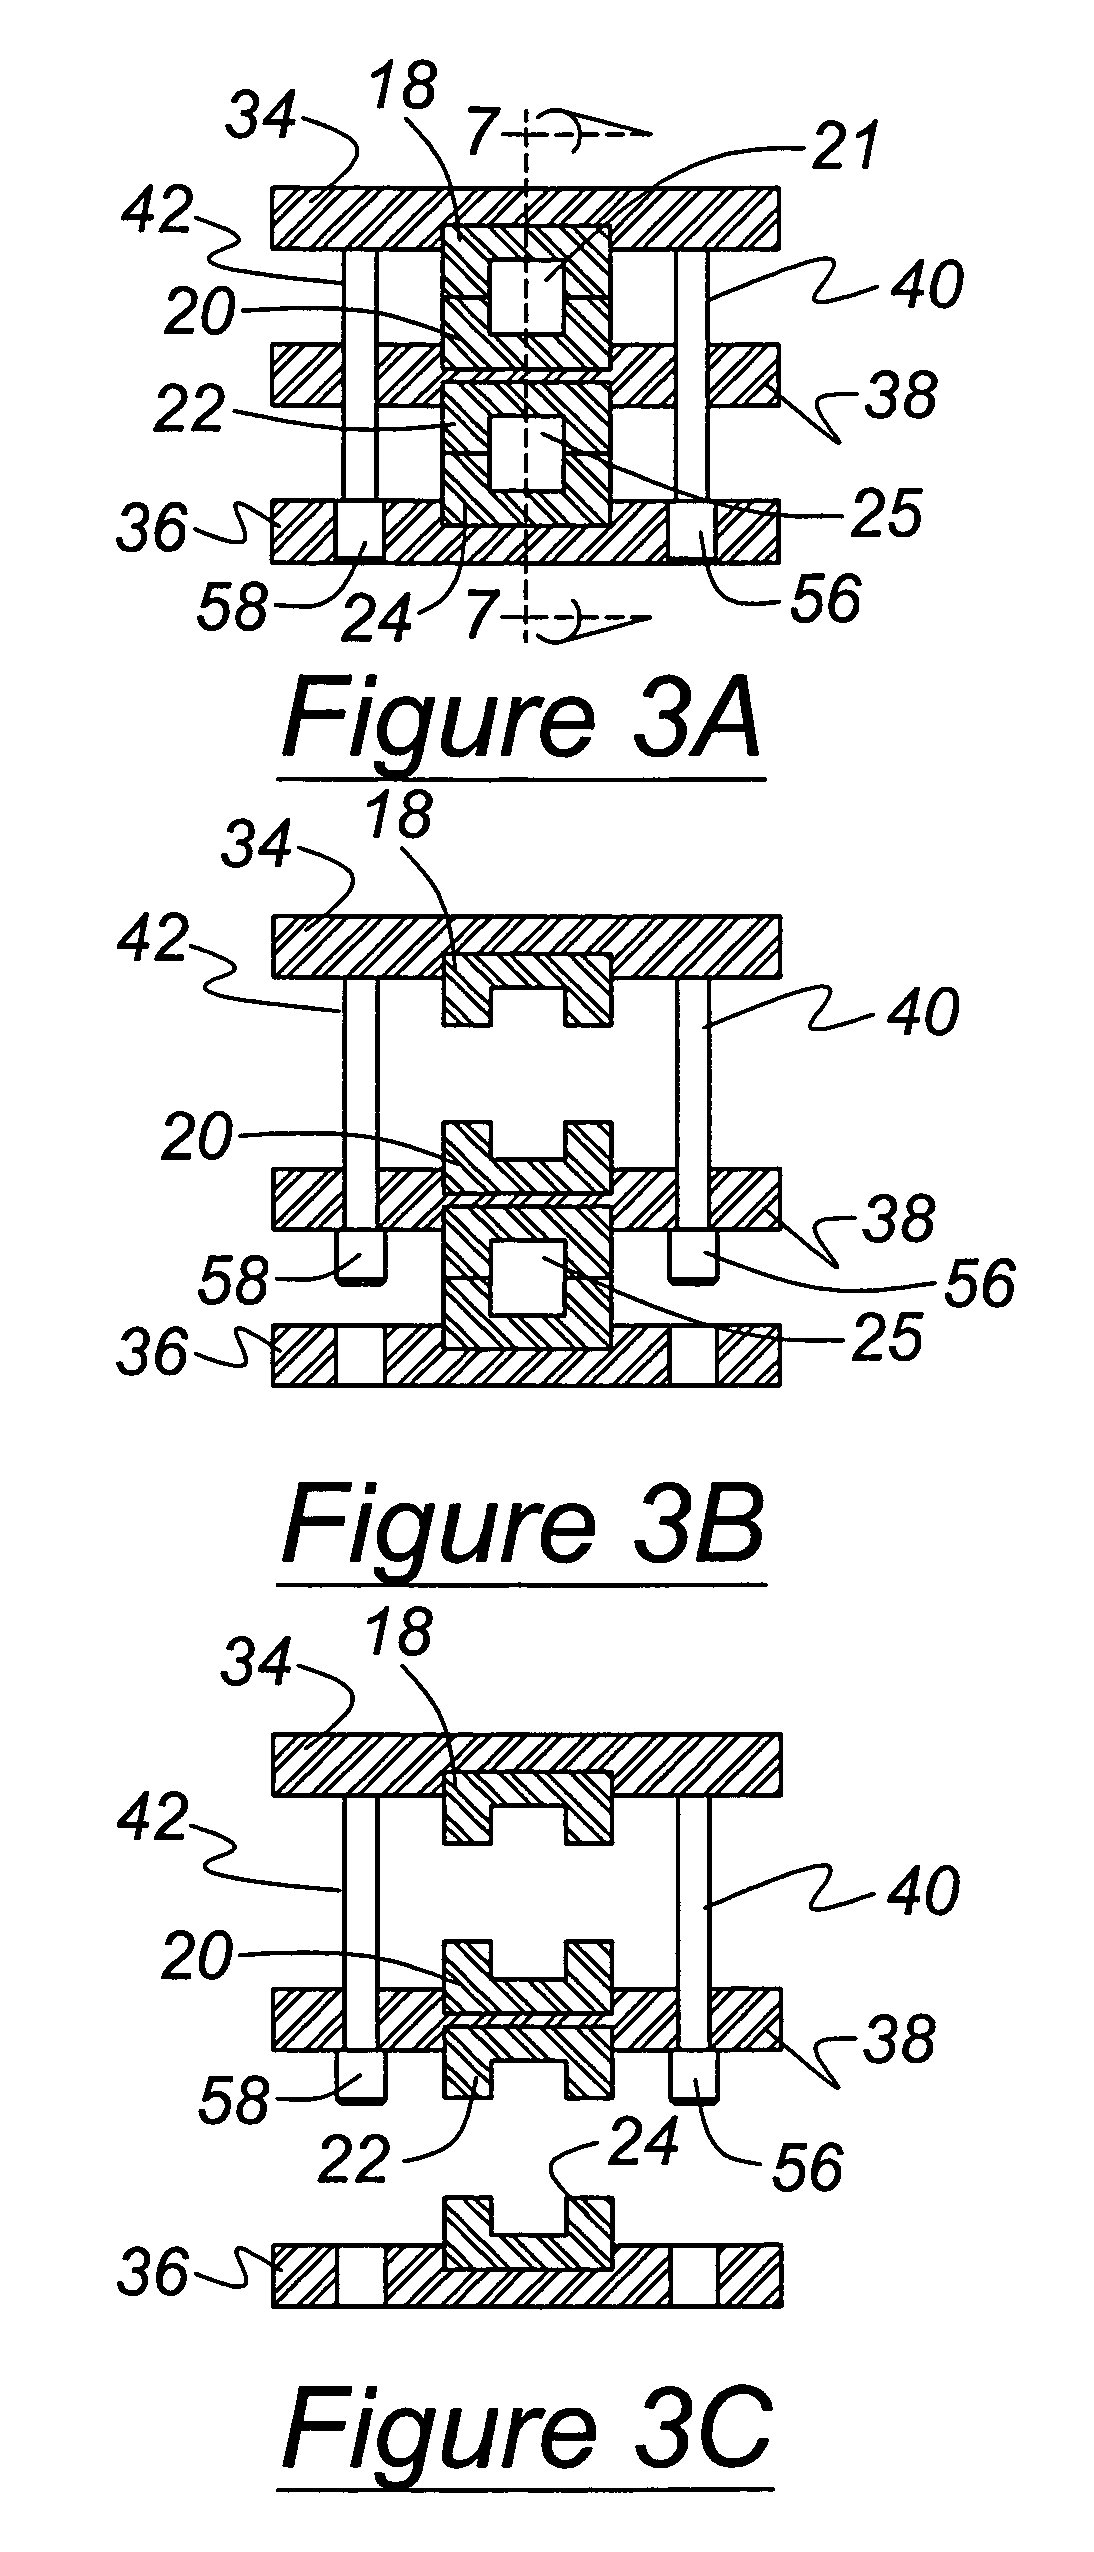 Apparatus and method for opening and closing stacked hydroforming dies